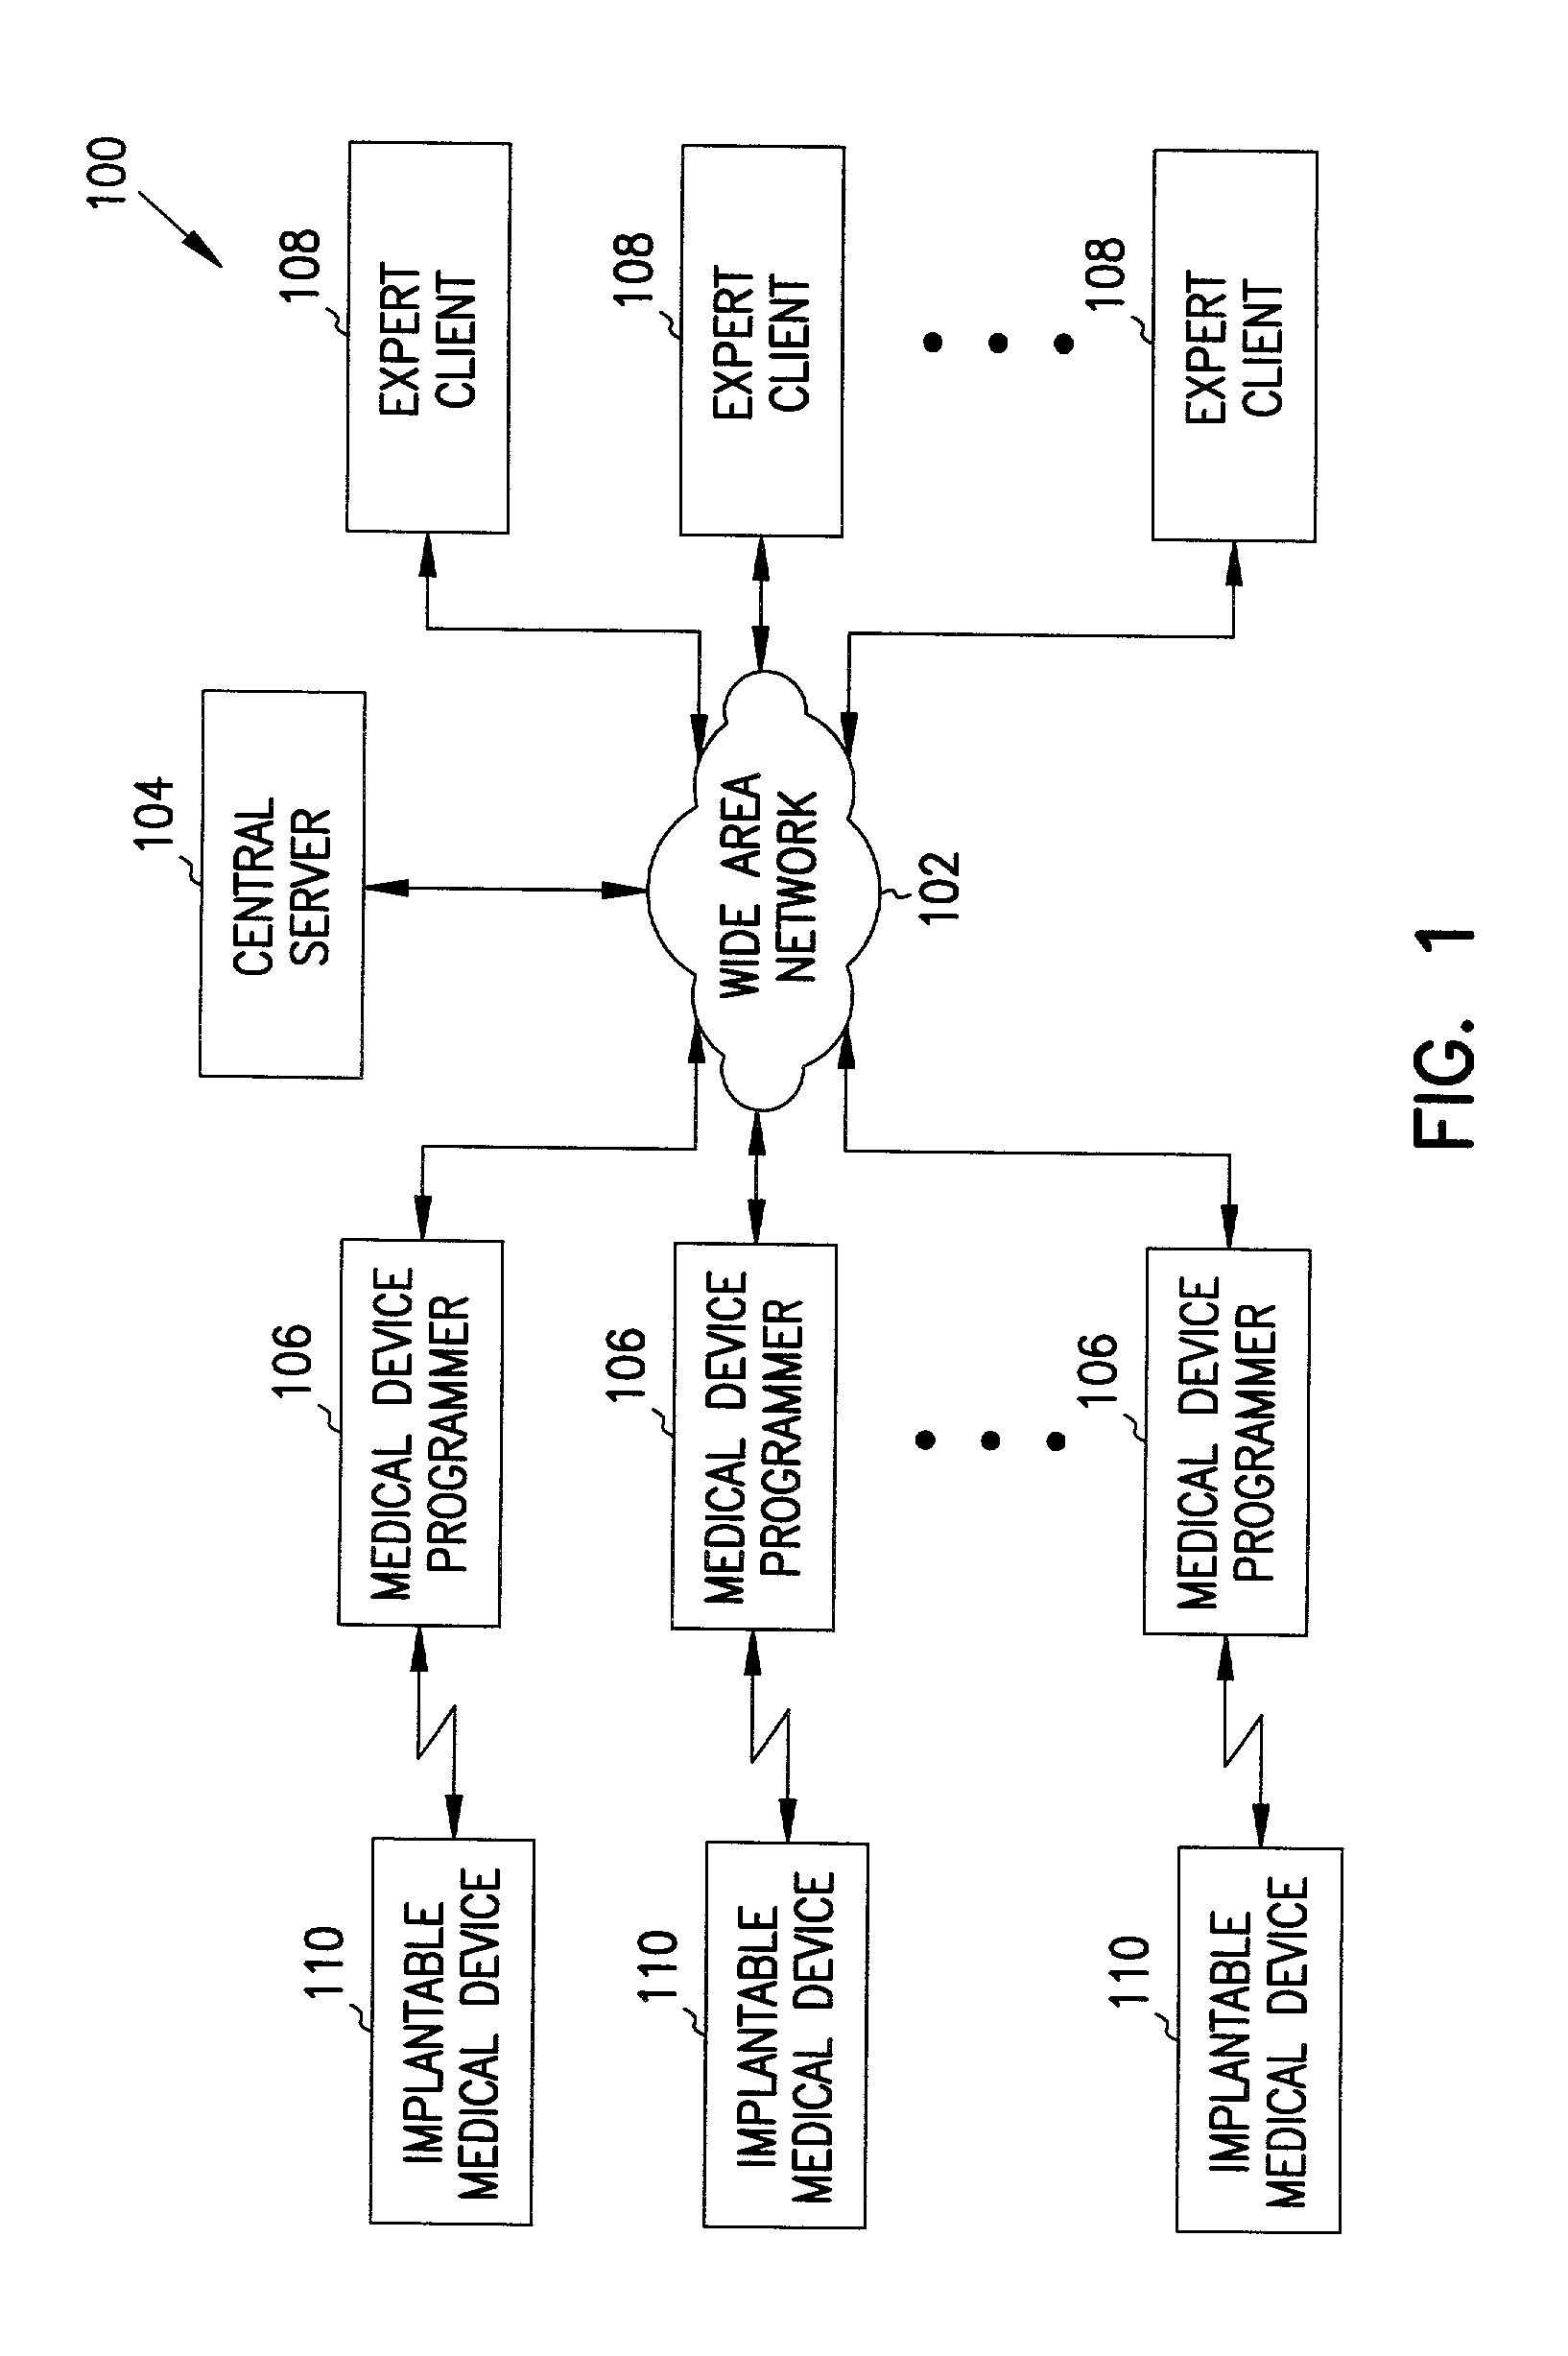 Centralized management system for programmable medical devices